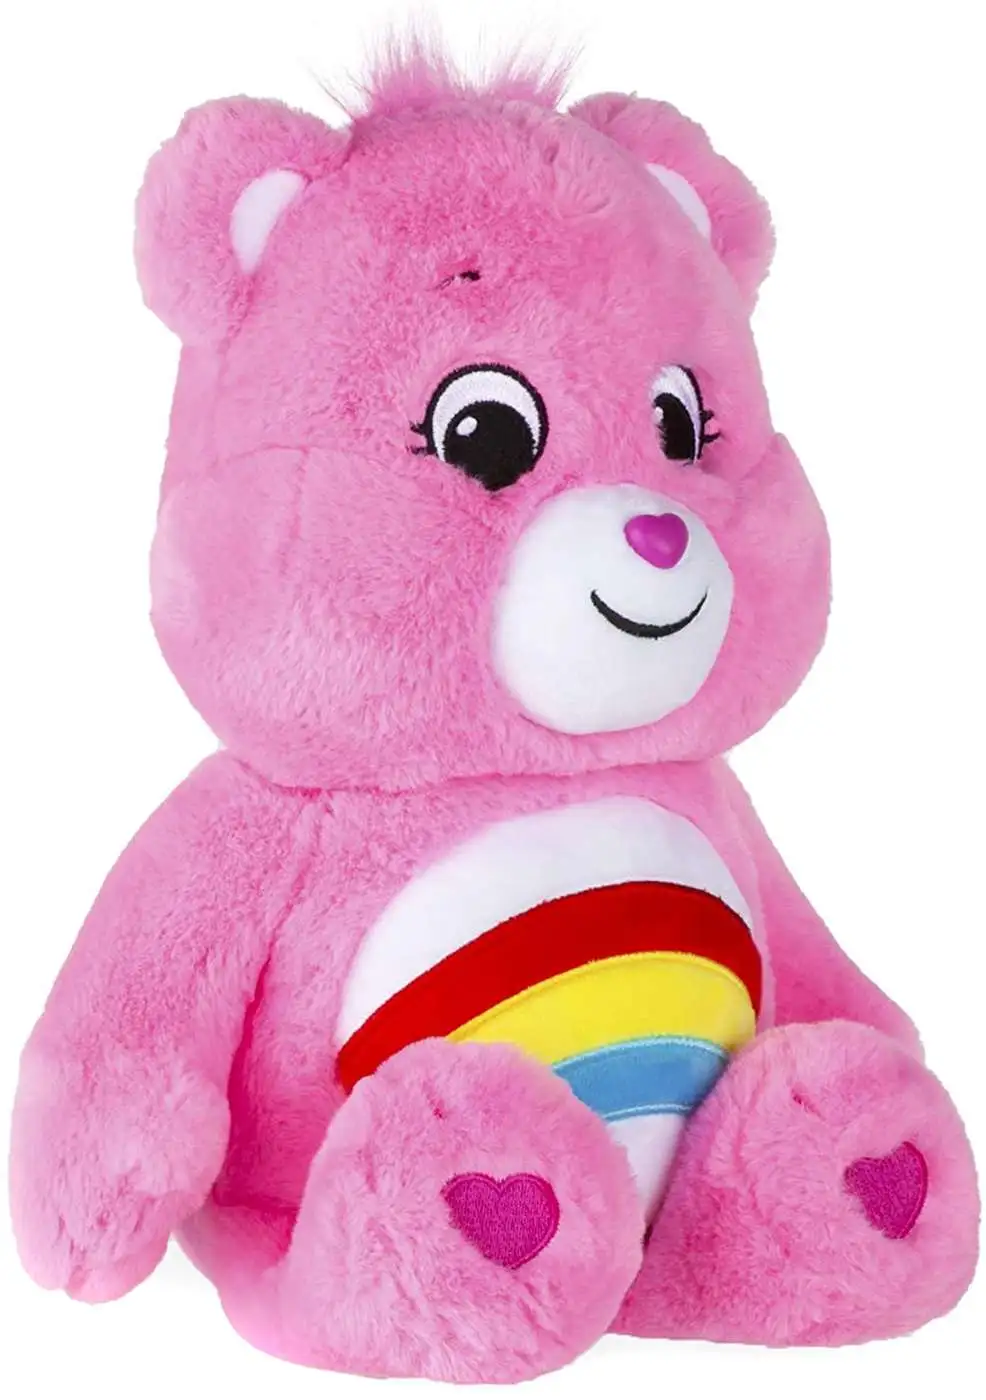 how many care bears are there 2021